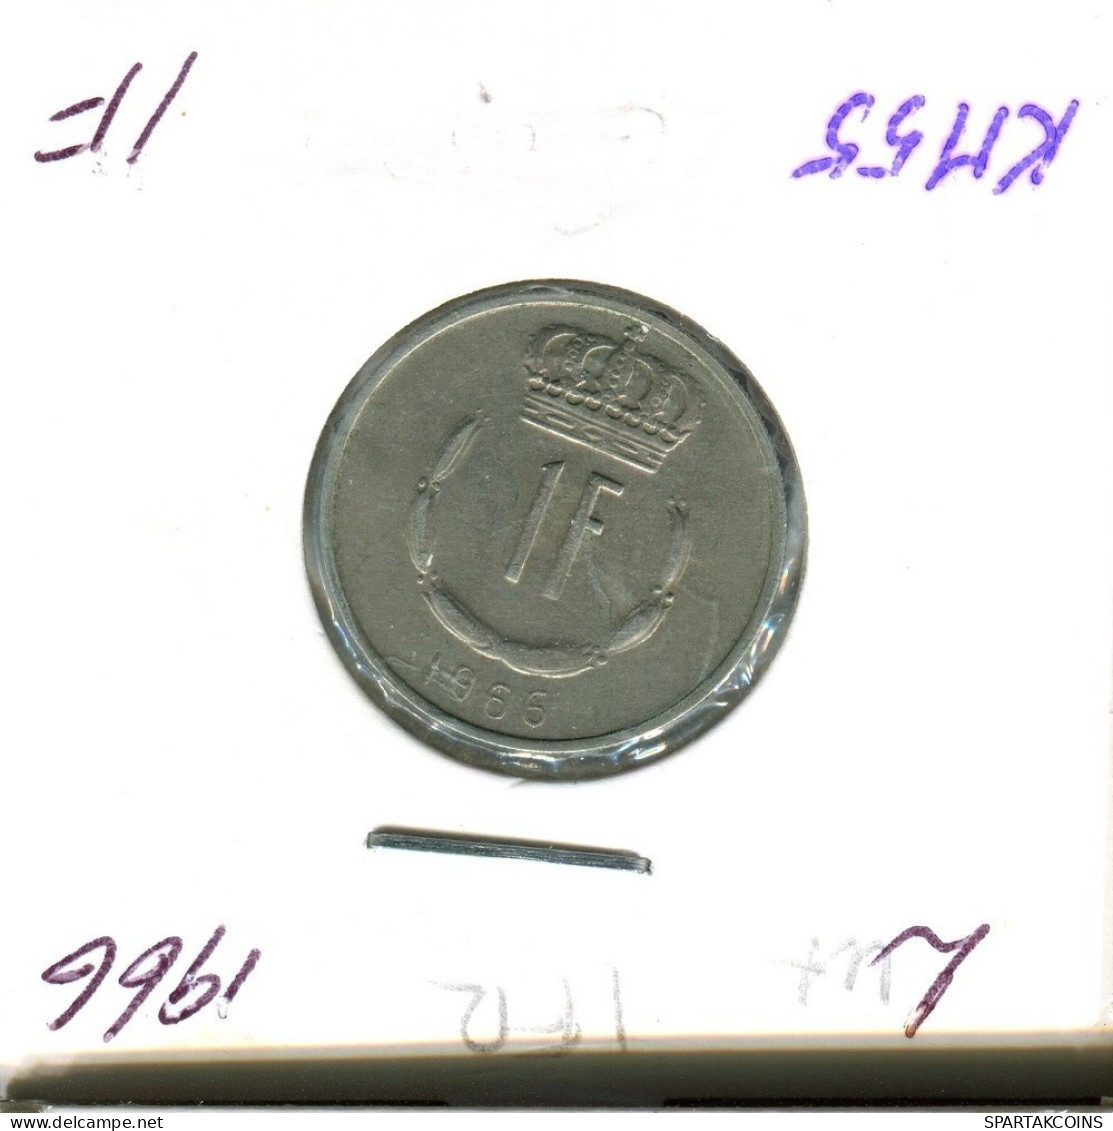 1 FRANC 1966 LUXEMBURG LUXEMBOURG Münze #AT207.D.A - Luxembourg